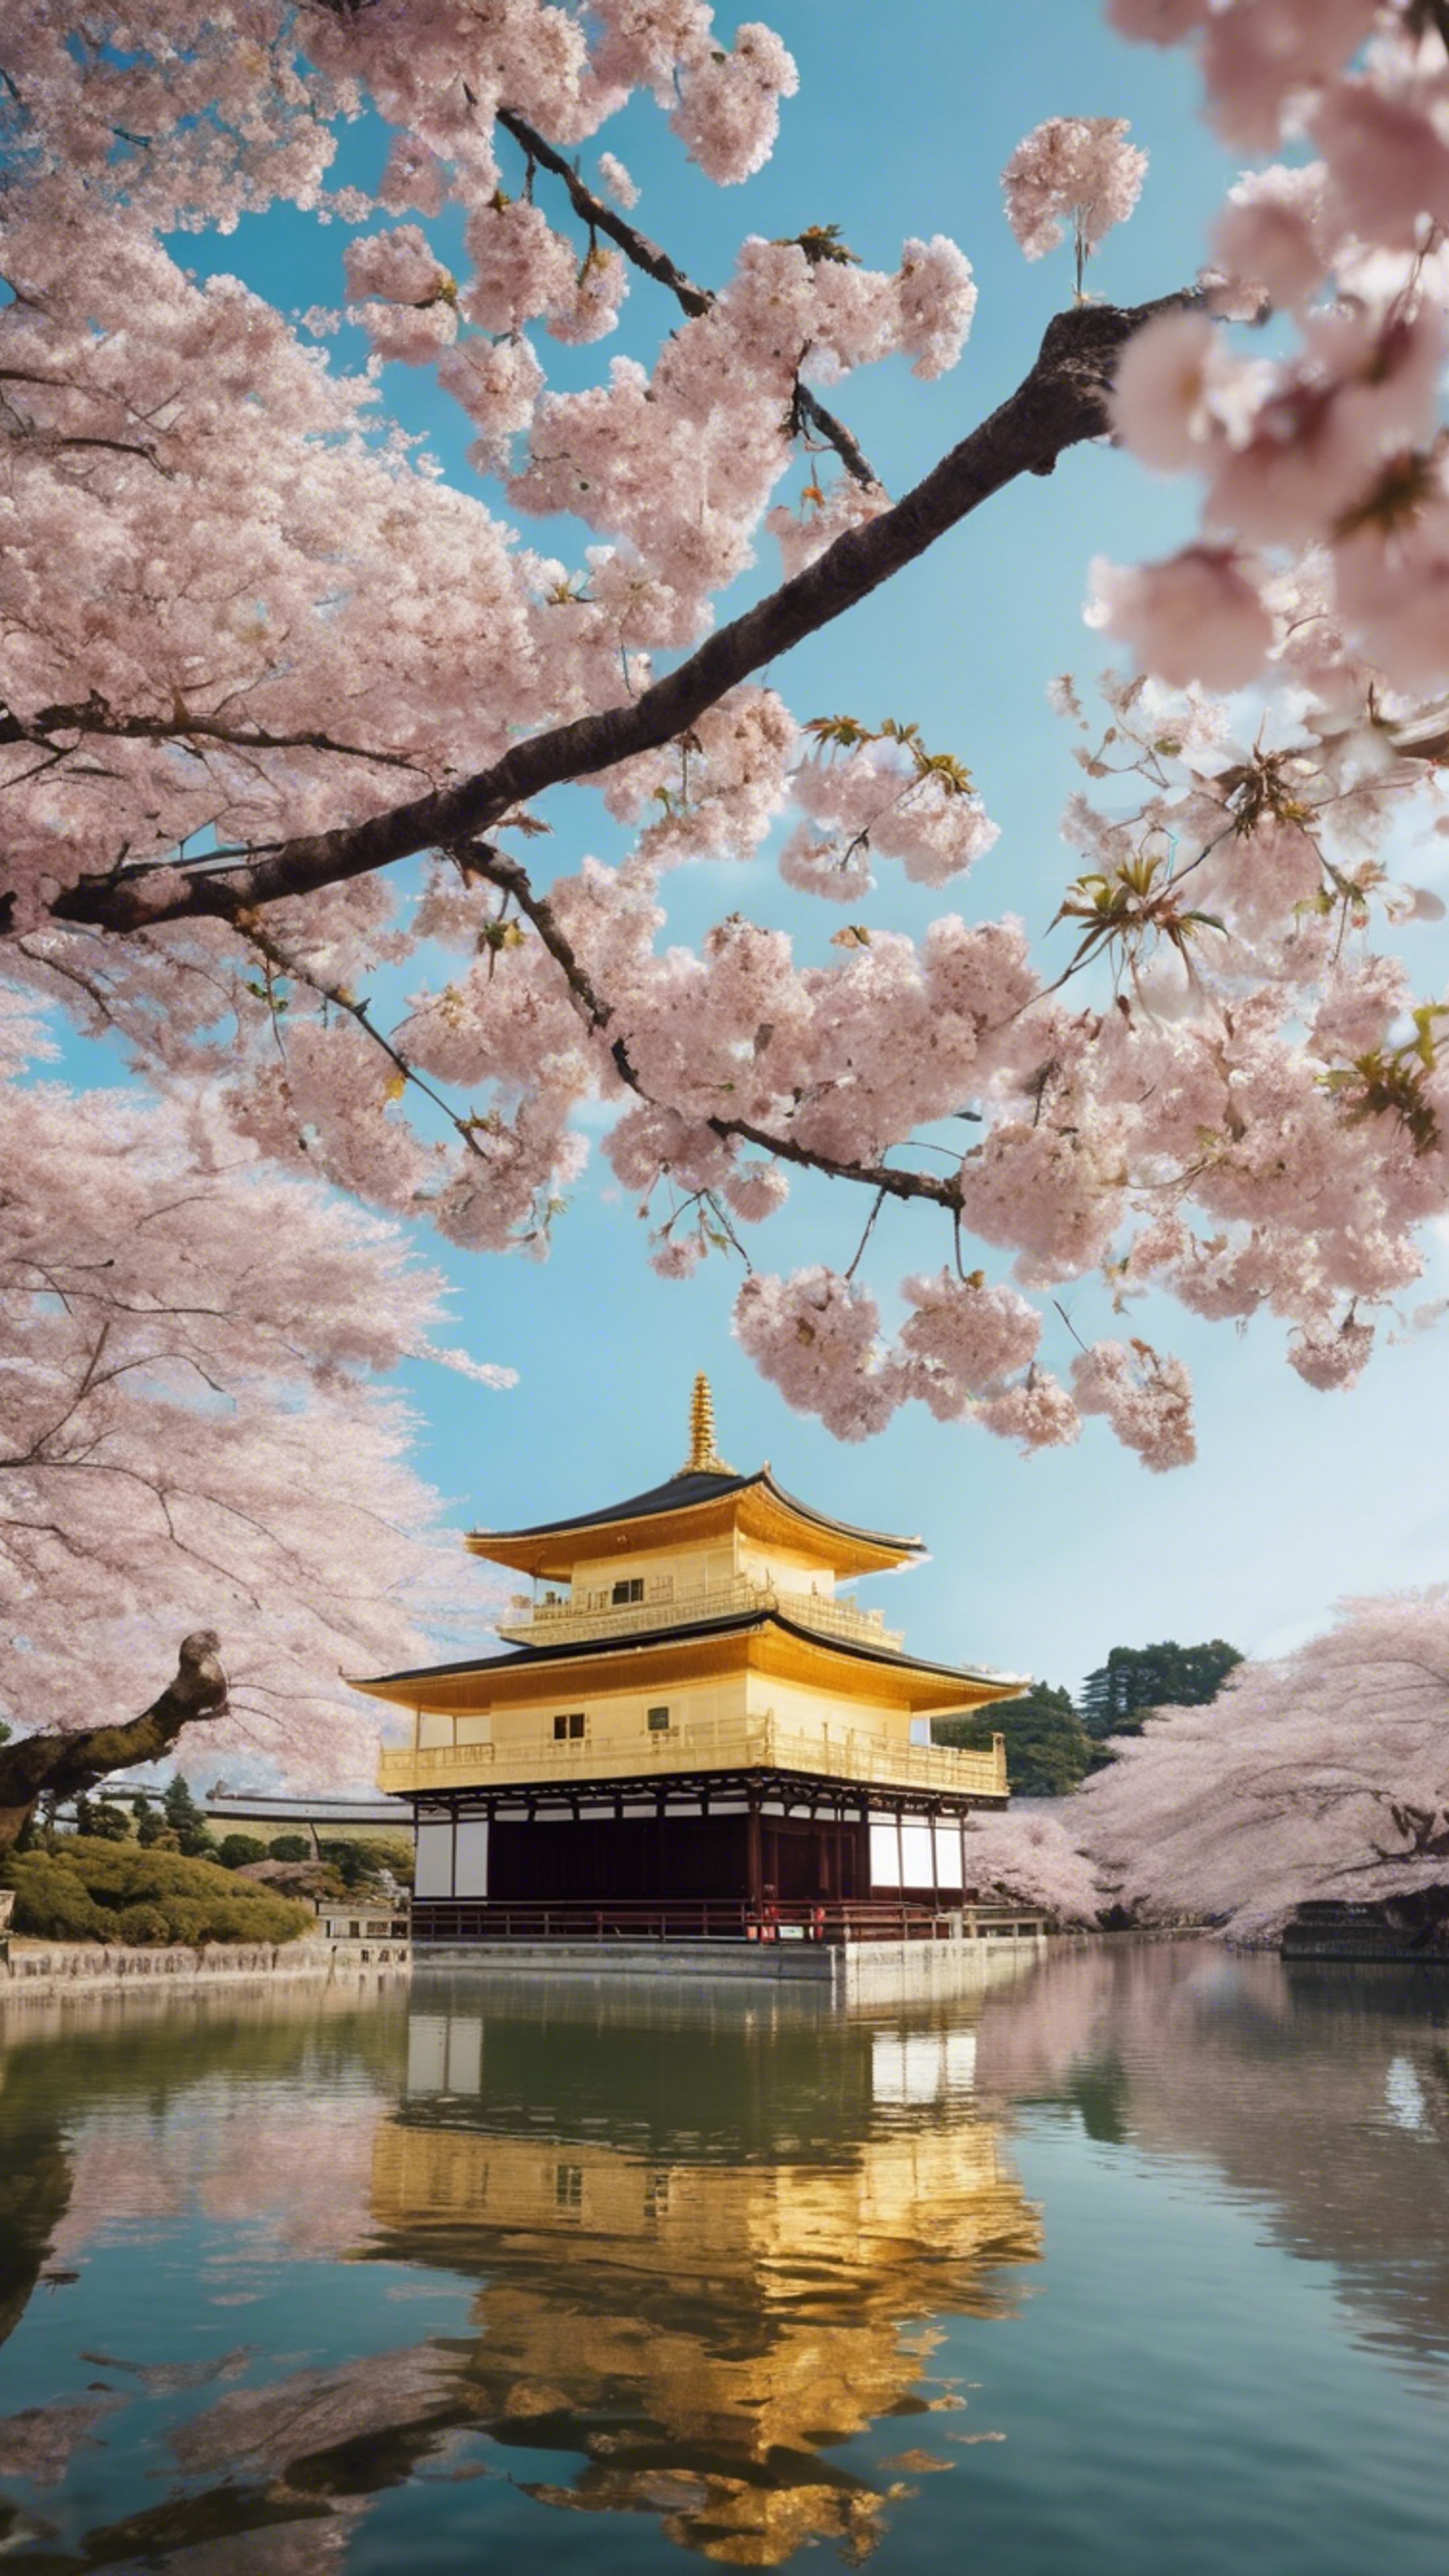 A cherry blossom tree in full bloom against a golden temple in Japan. Ταπετσαρία[9303417fc76c471283c9]